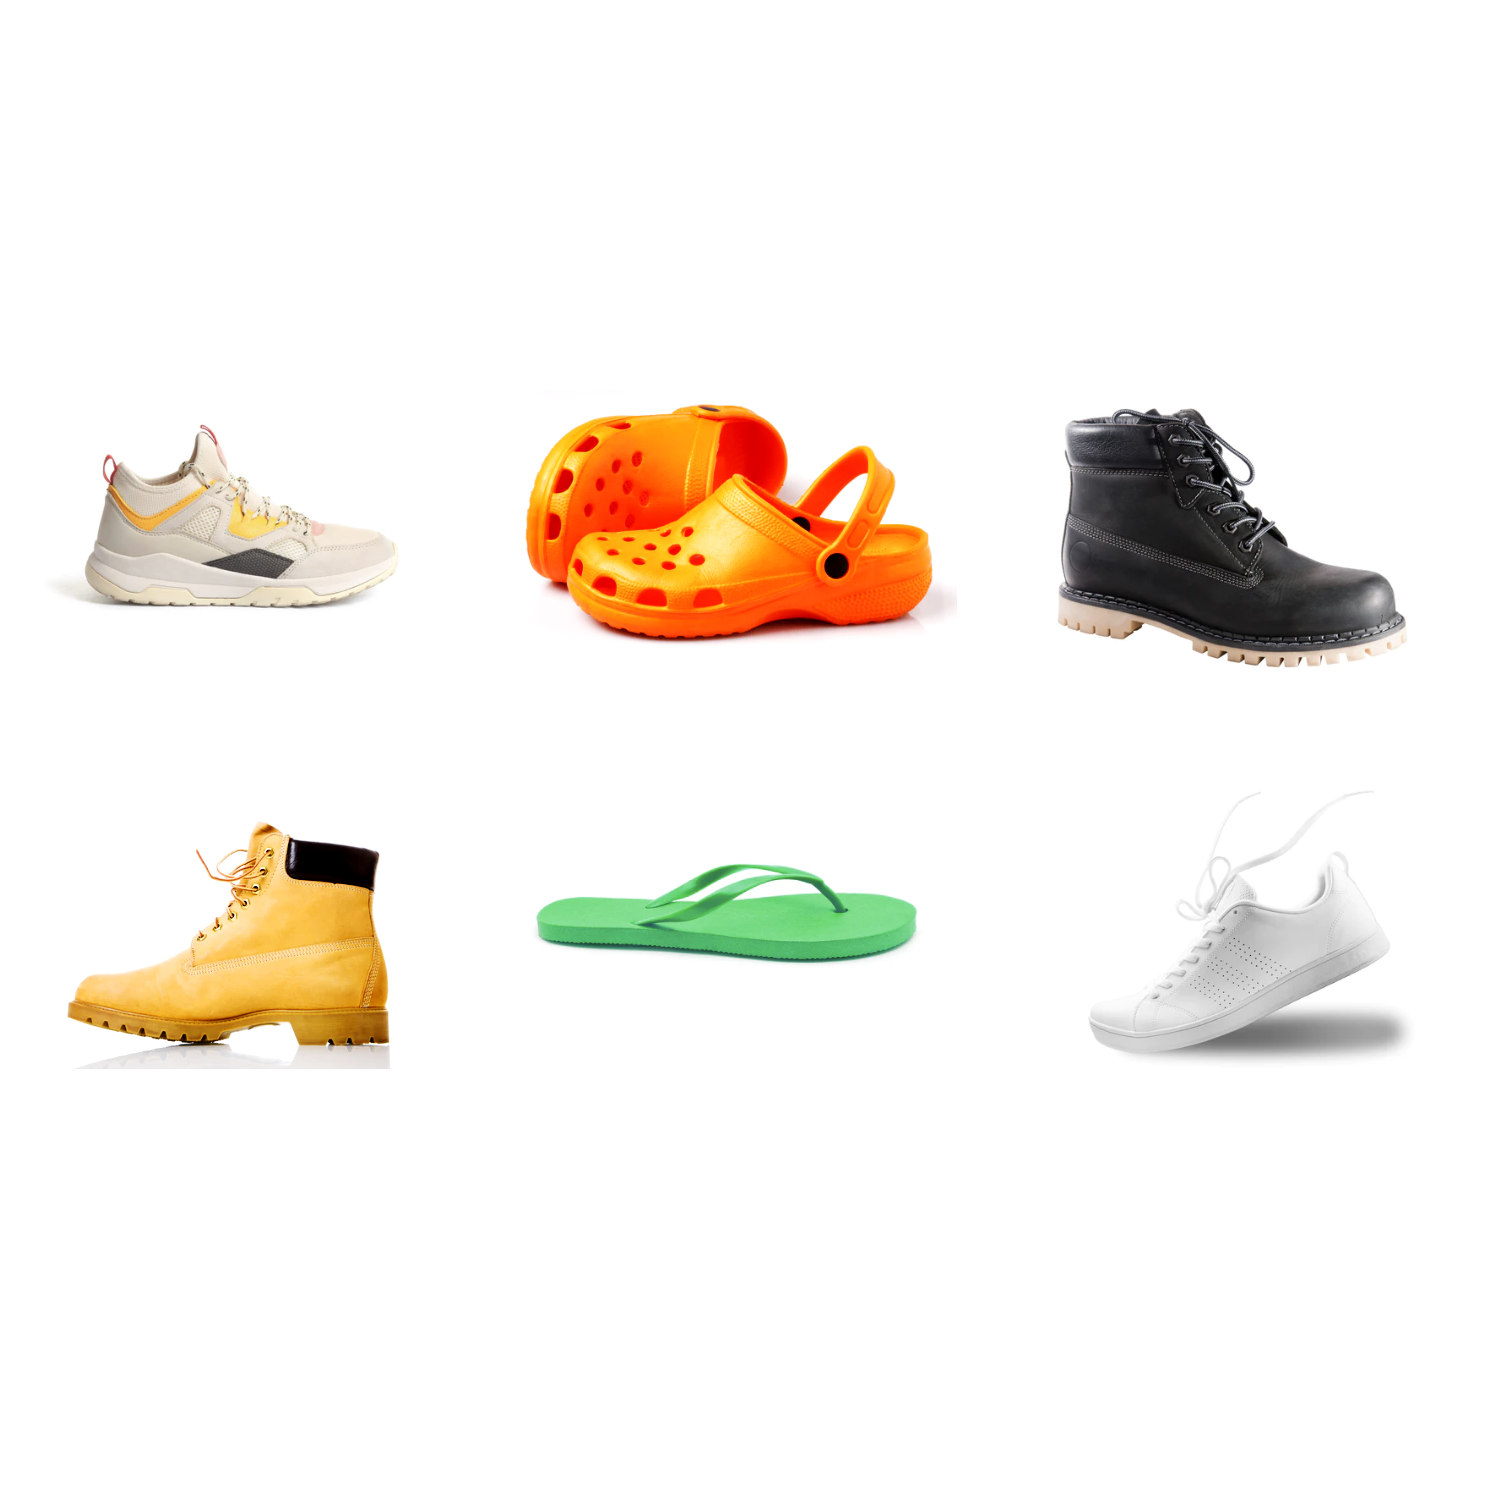 An image representing multiple different types of footwear that would benefit from the Purra Copptech technology in their insoles.  Top row from left to right - single white sneaker with yellow highlights, middle image a pair of bright orange Crocs, right image a dark brown hiking boot with rubberized cream sole.  Bottom row from left to right.  A single Timberland style boot with hi-top, middle image a single bright green flip-flop, bottom right image a bright white tennis shoe.